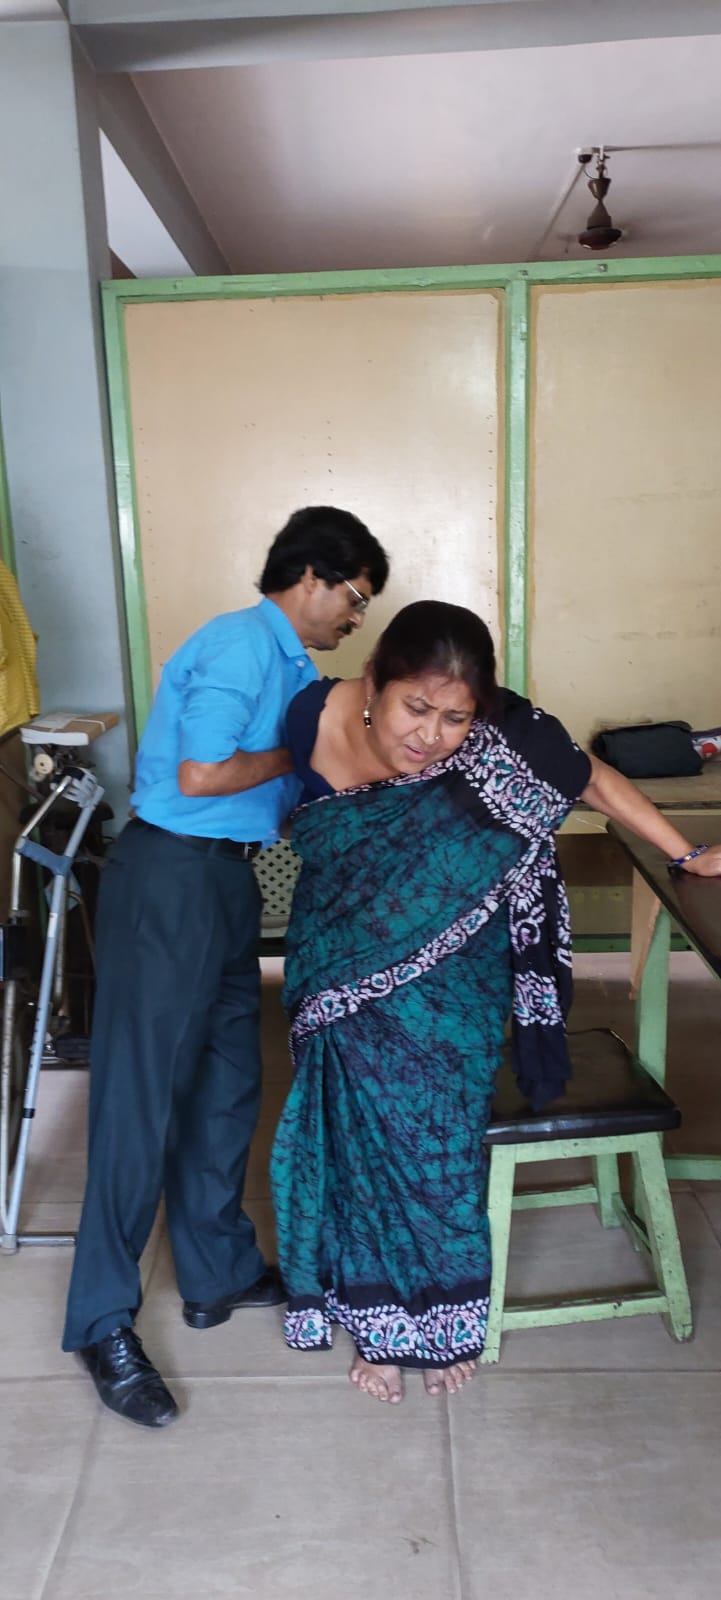 Physiotherapy Centre for the Needy at free of cost.